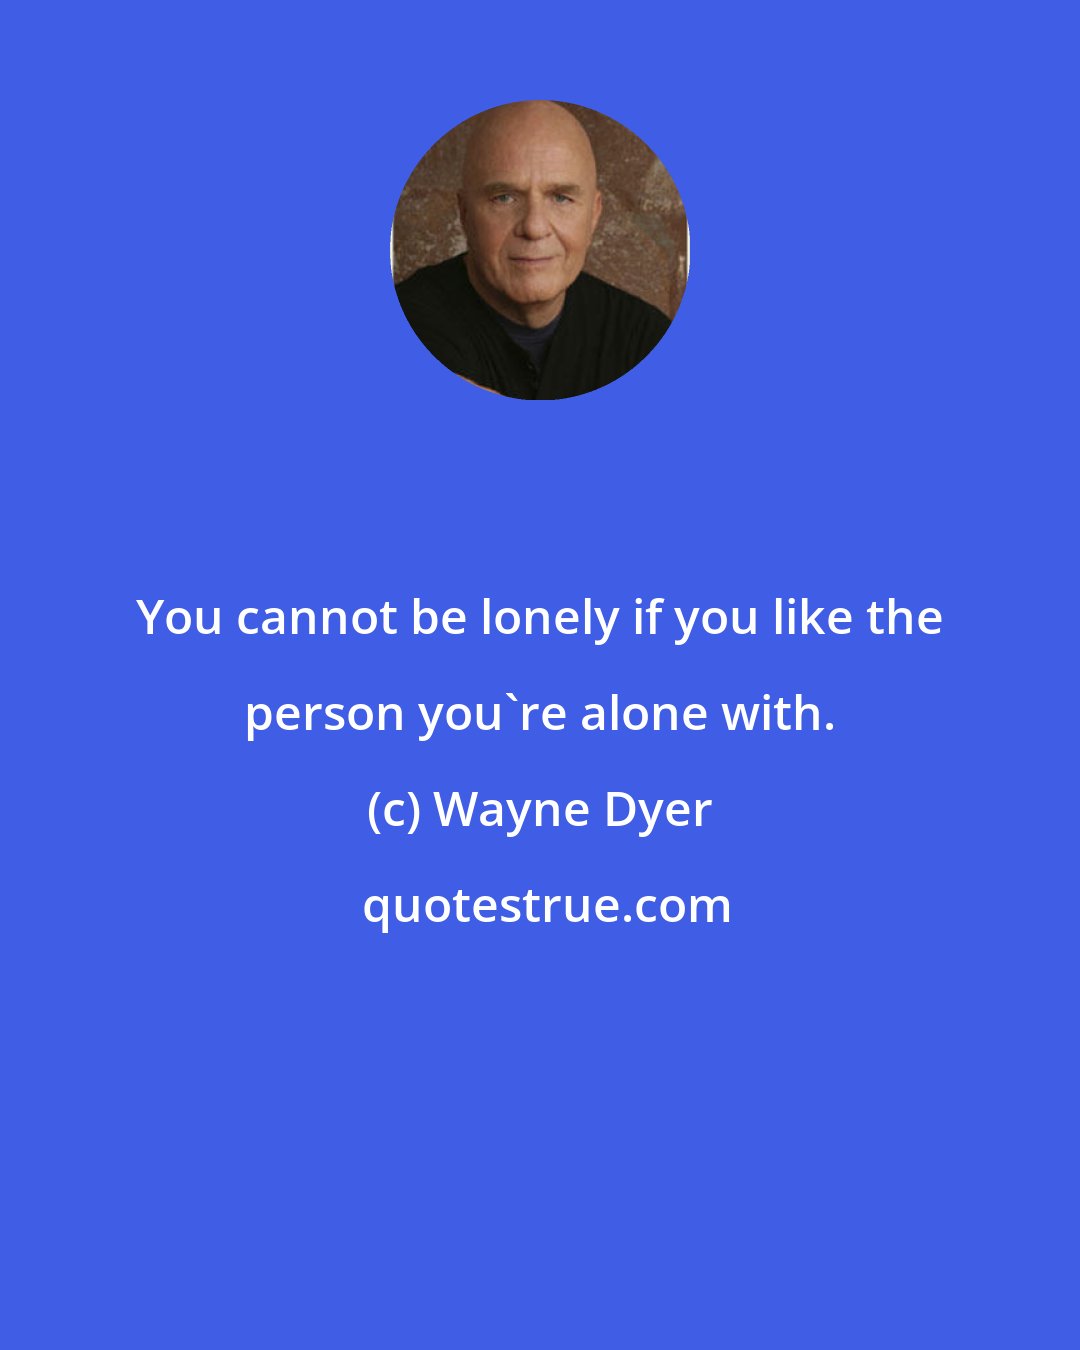 Wayne Dyer: You cannot be lonely if you like the person you're alone with.